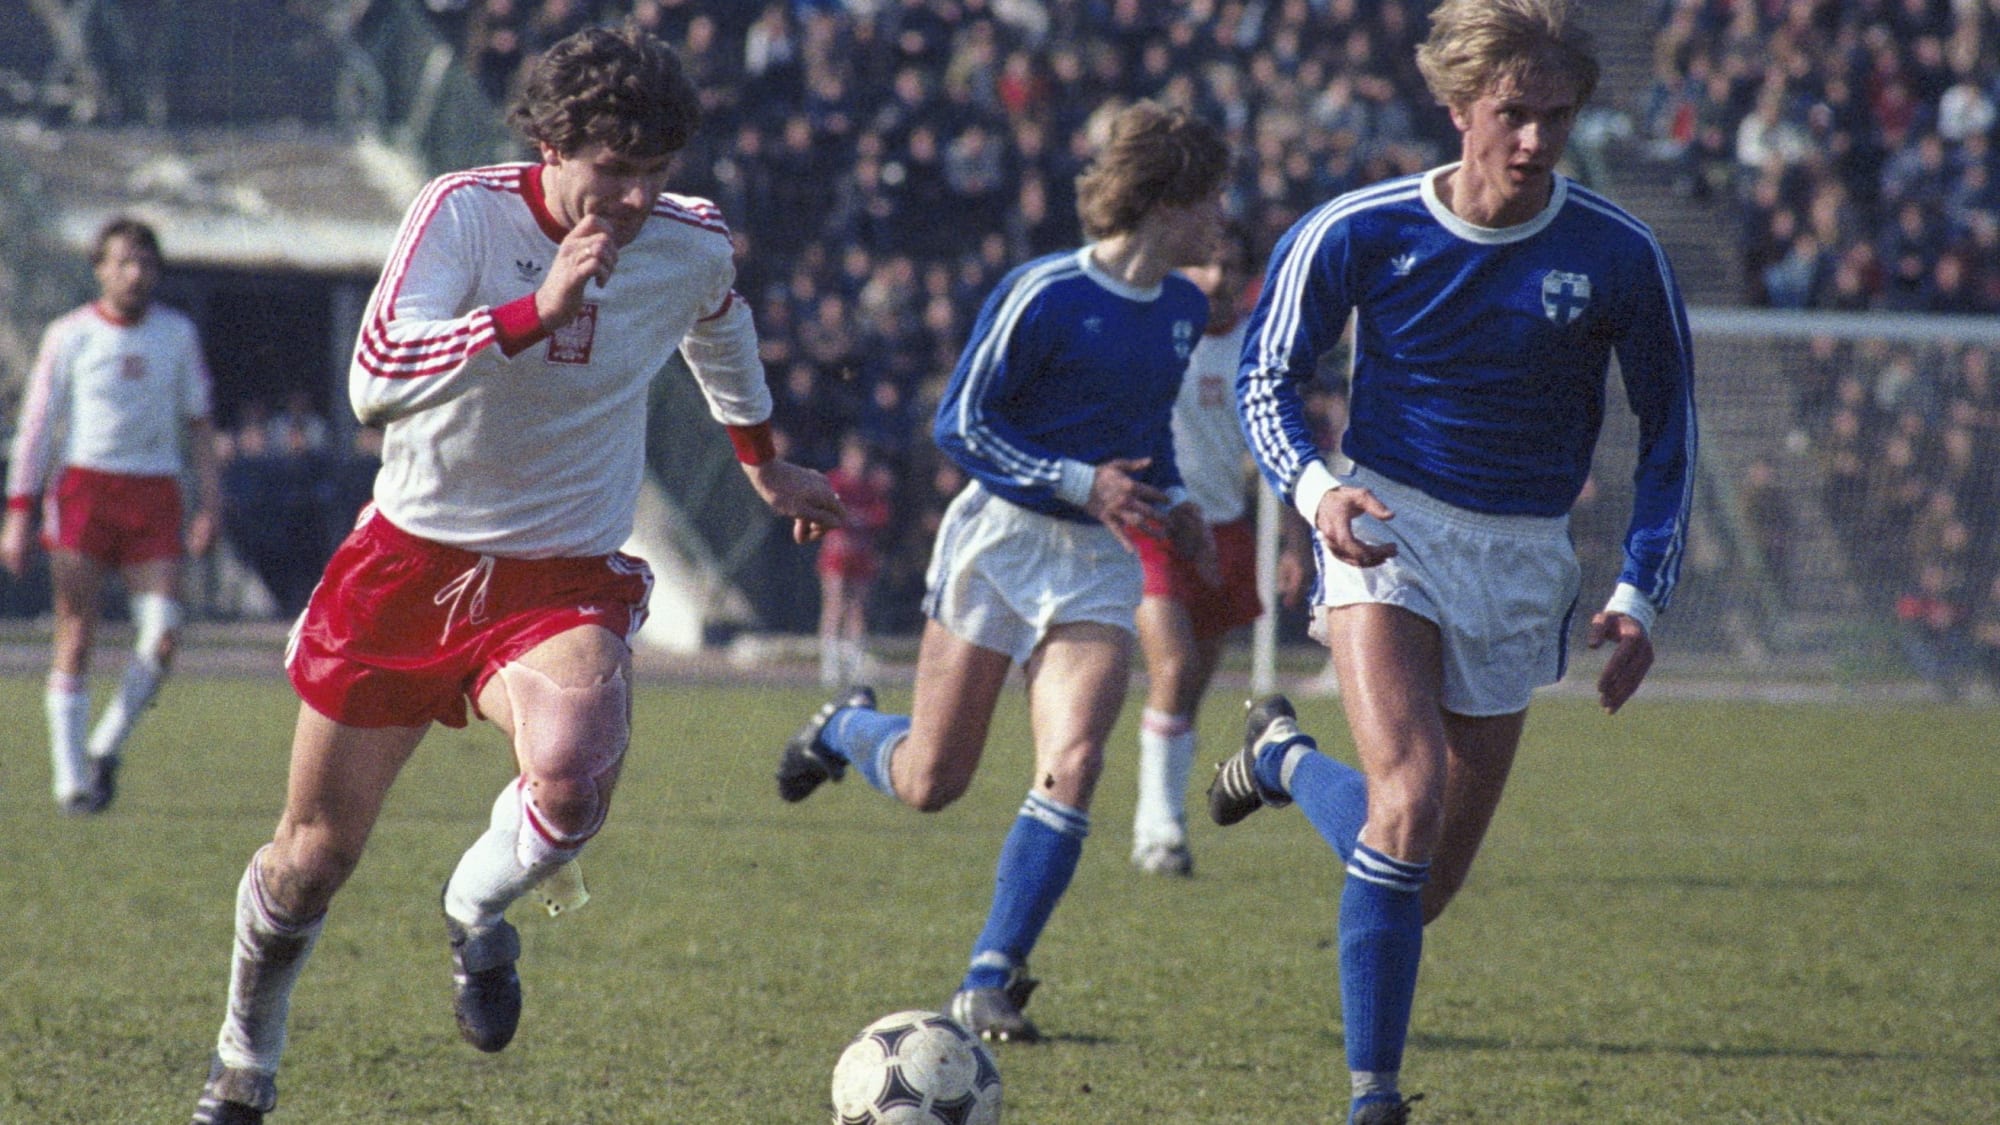 epa03135435 (FILE) A file photograph dated 17 April 1983 shows Poland's Wlodzimierz Smolarek (L) in action during the EURO 1984 qualifying soccer match against Finland, in Warsaw, Poland. Former Polish international striker Wlodzimierz Smolarek has died at the age of 54 as media reports on 07 March 2012. Smolarek was part of the Poland team that finished third at the 1982 World Cup. He scored 13 goals in 60 games for Poland between 1980 and 1992. EPA/Jan Morek POLAND OUT  ++